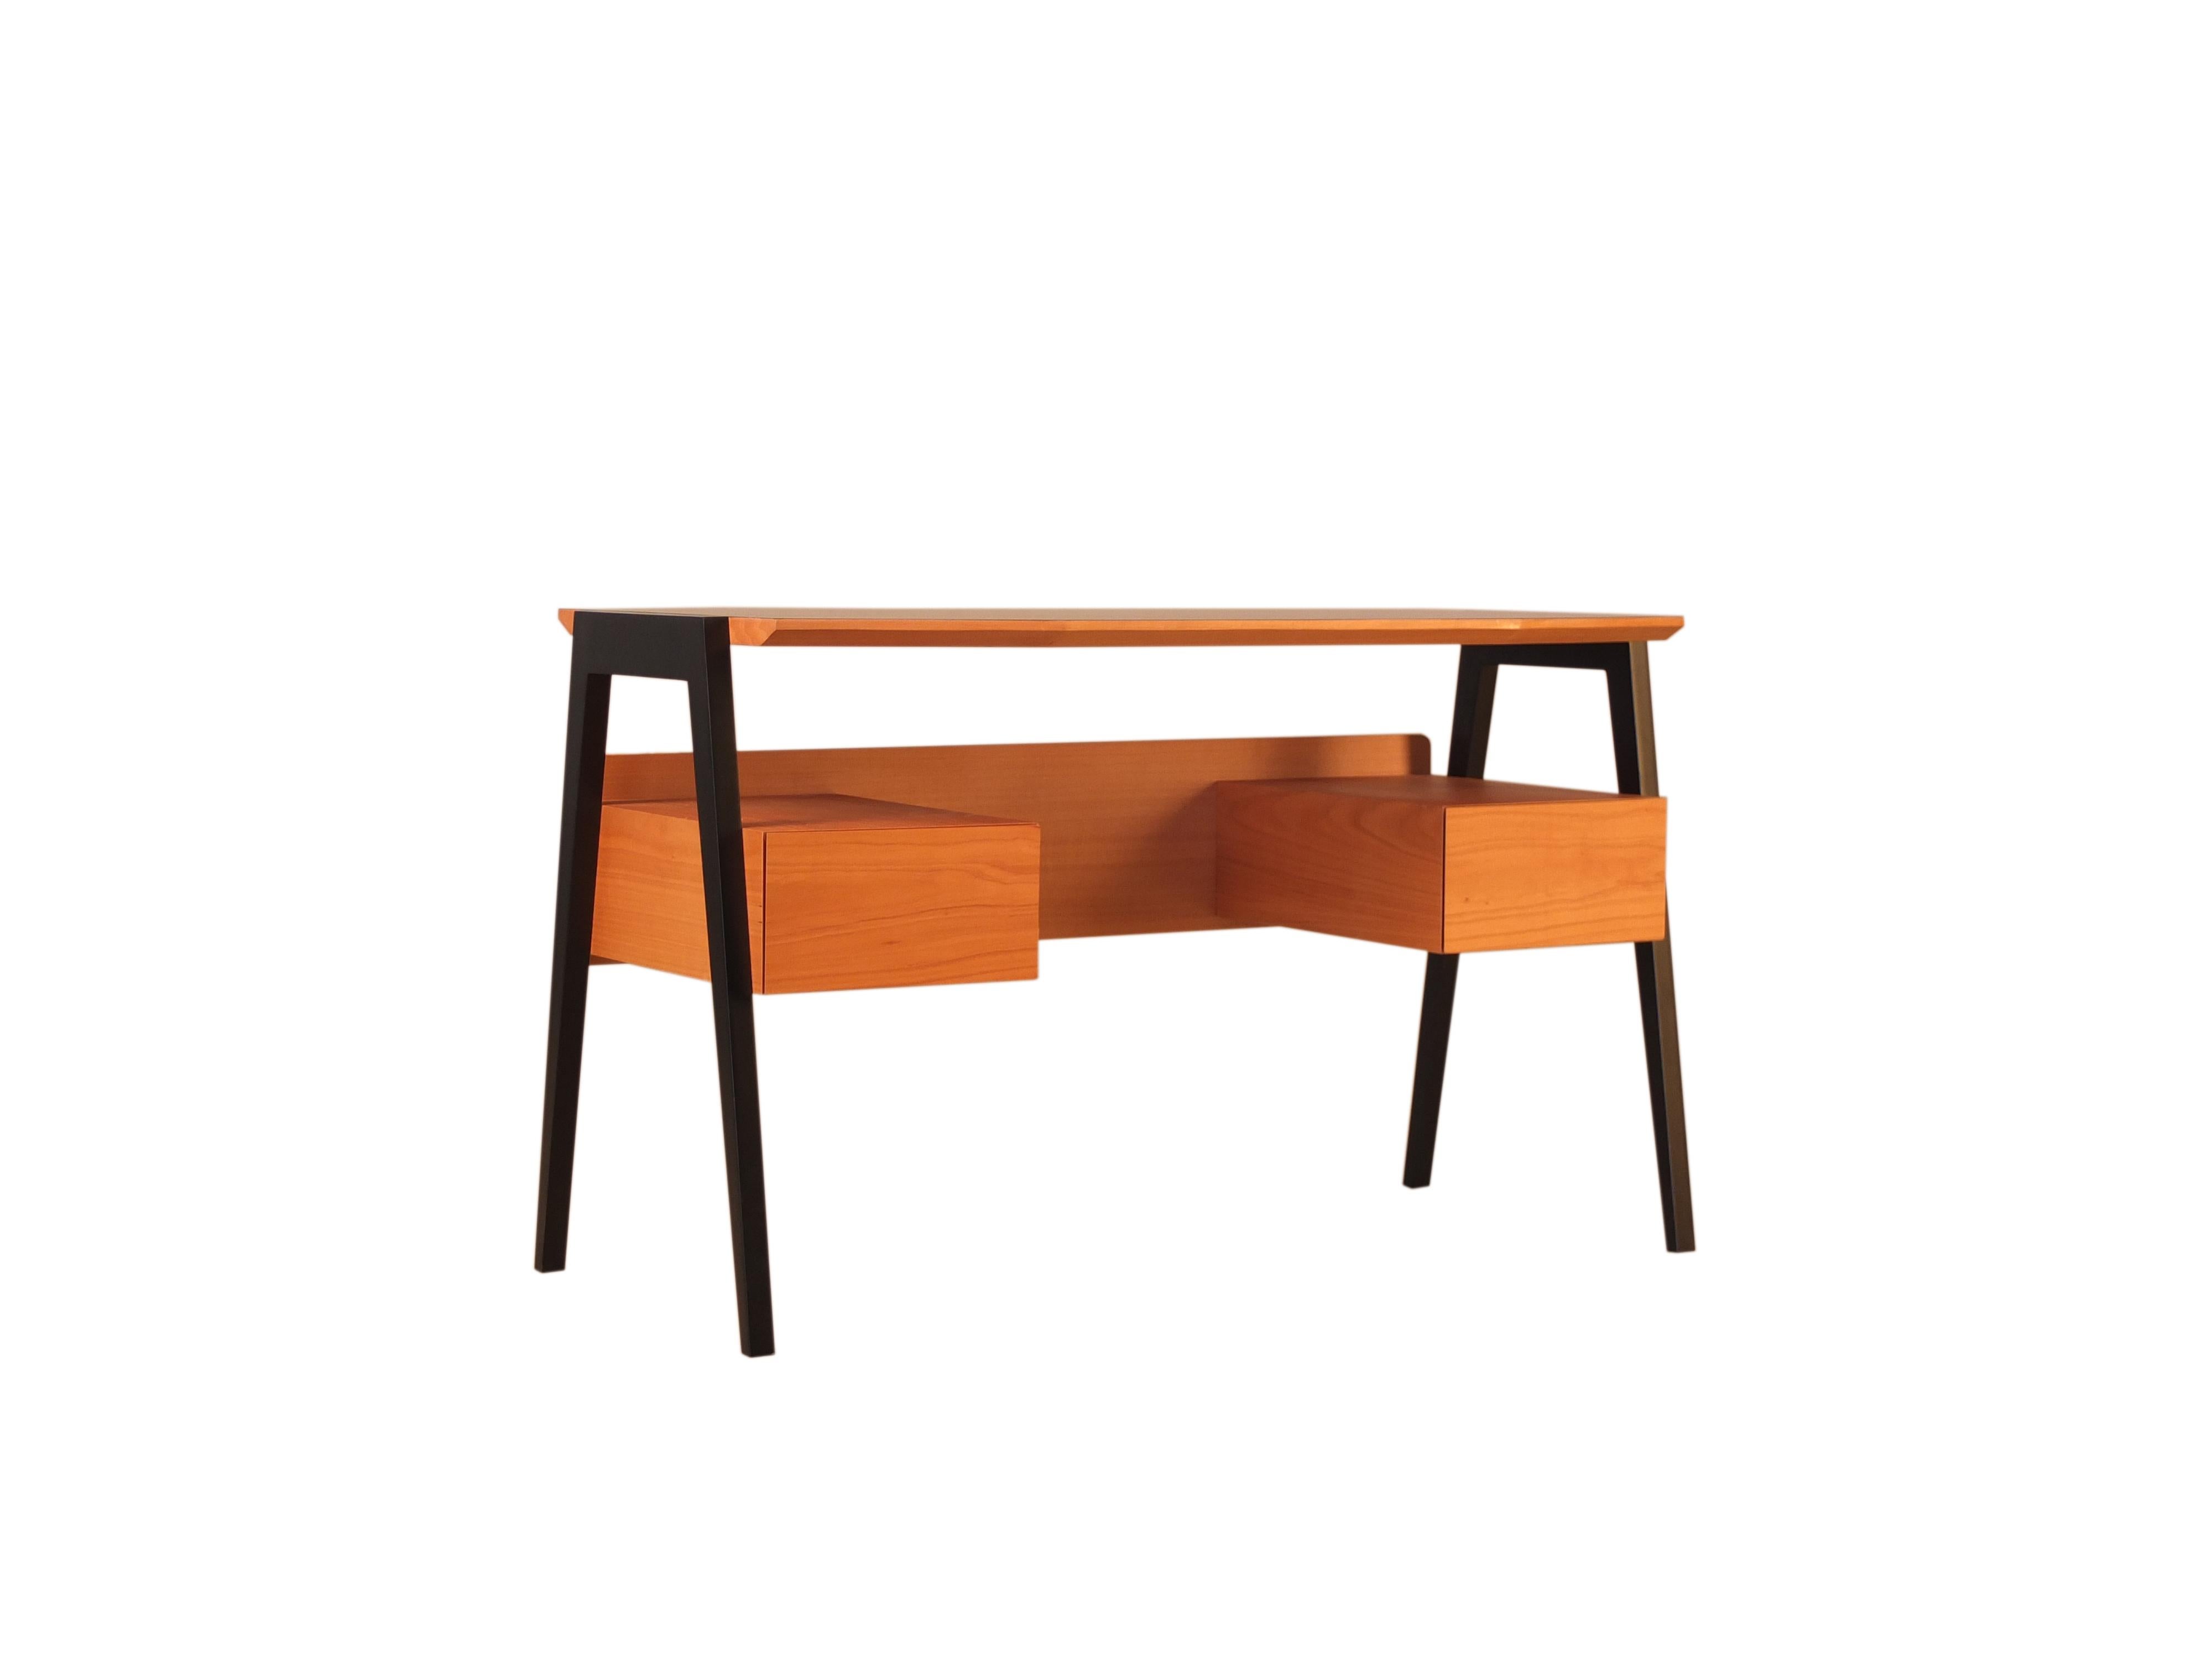 Hand-Crafted Midcentury Style Wooden Writing Desk with Drawers, by Morelato